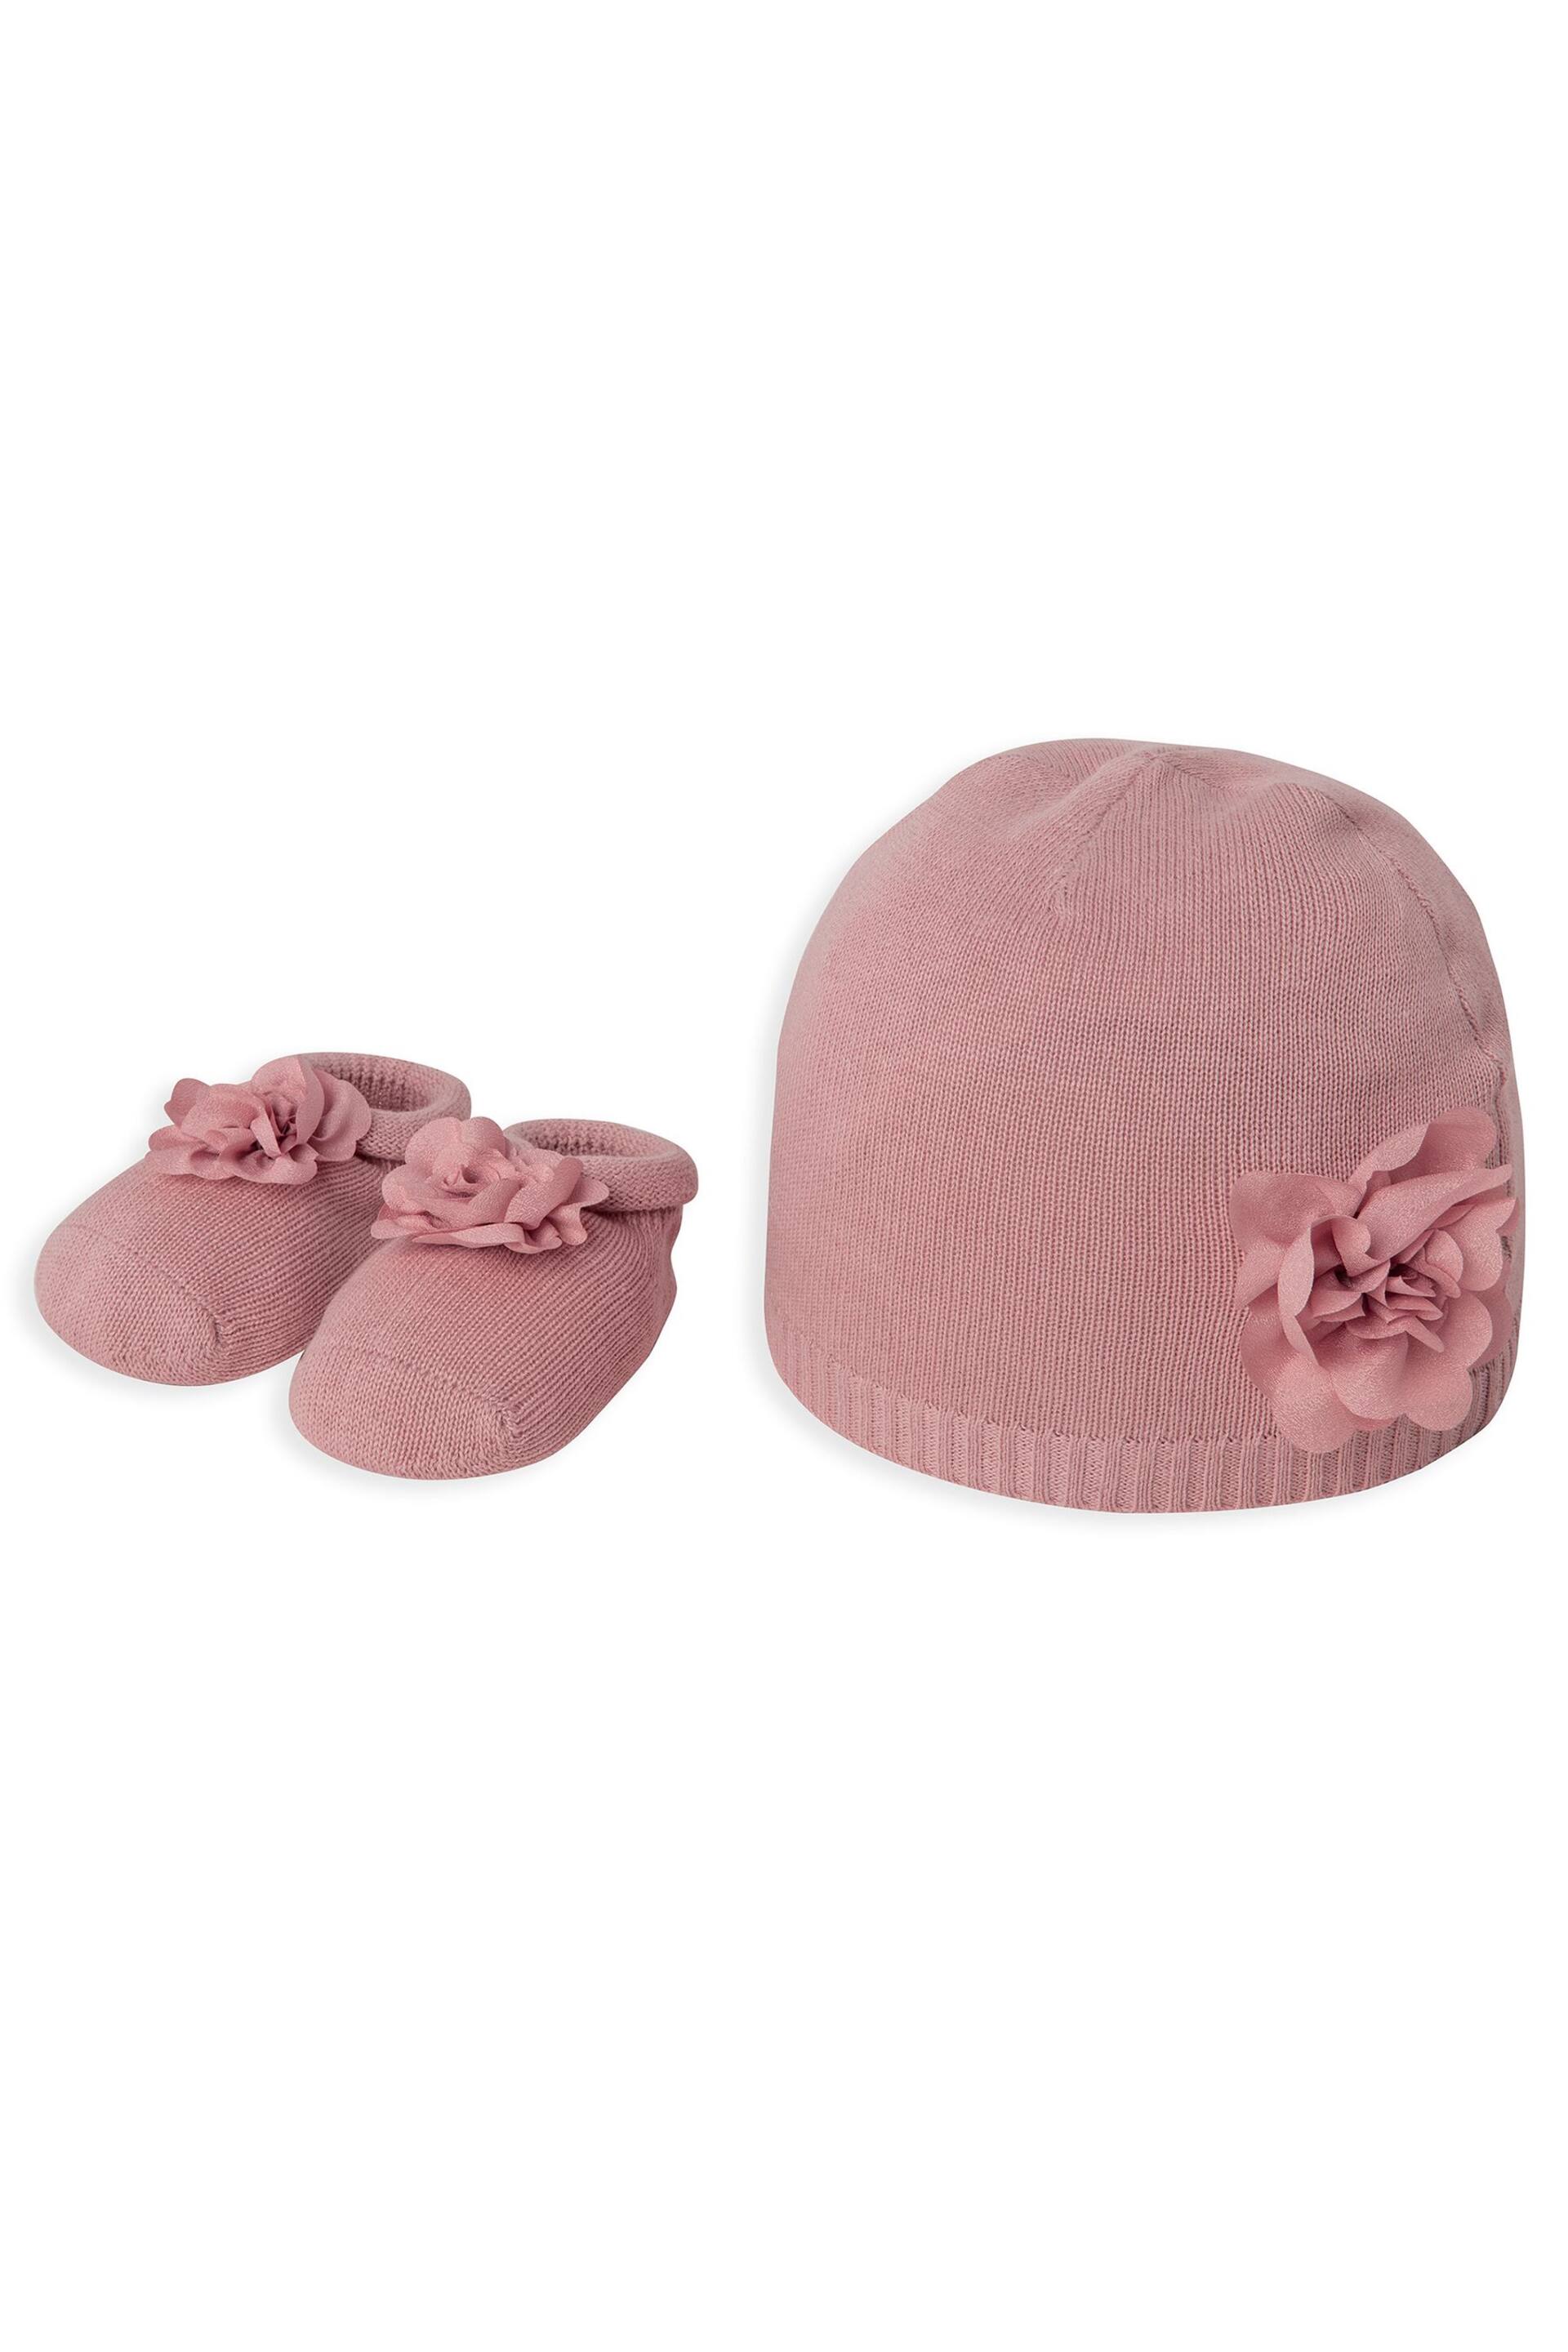 Mamas & Papas Girls Pink Flower Knit Hat and Booties - Image 1 of 3